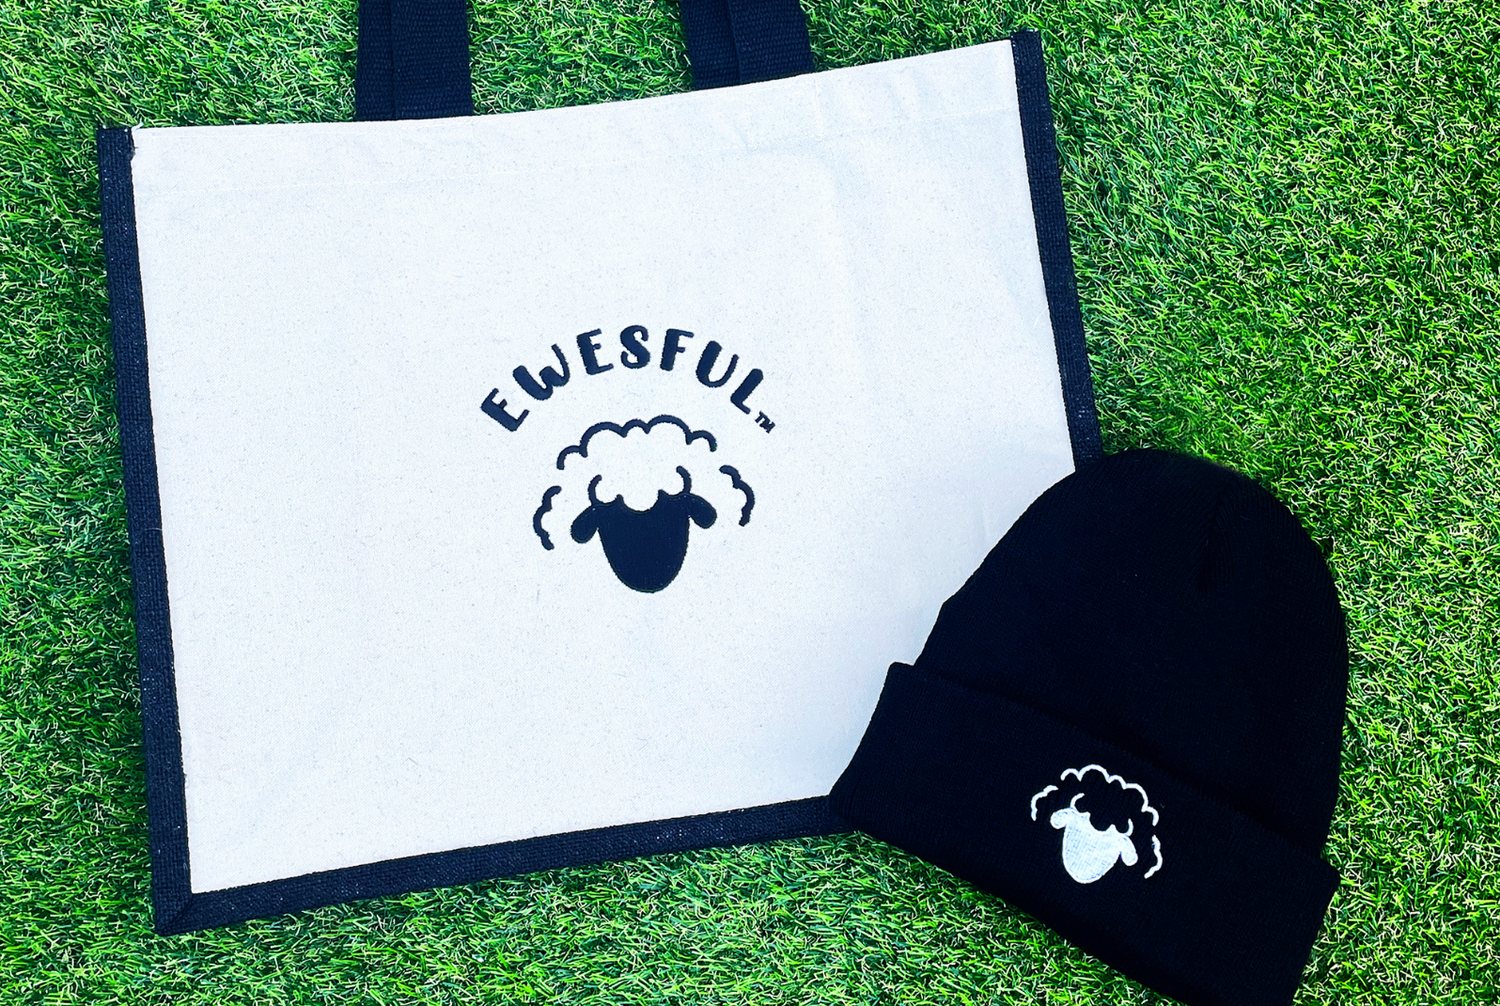 A black and natural jute shopping bag with knitted beanie hat featuring sheep embroidery logo.